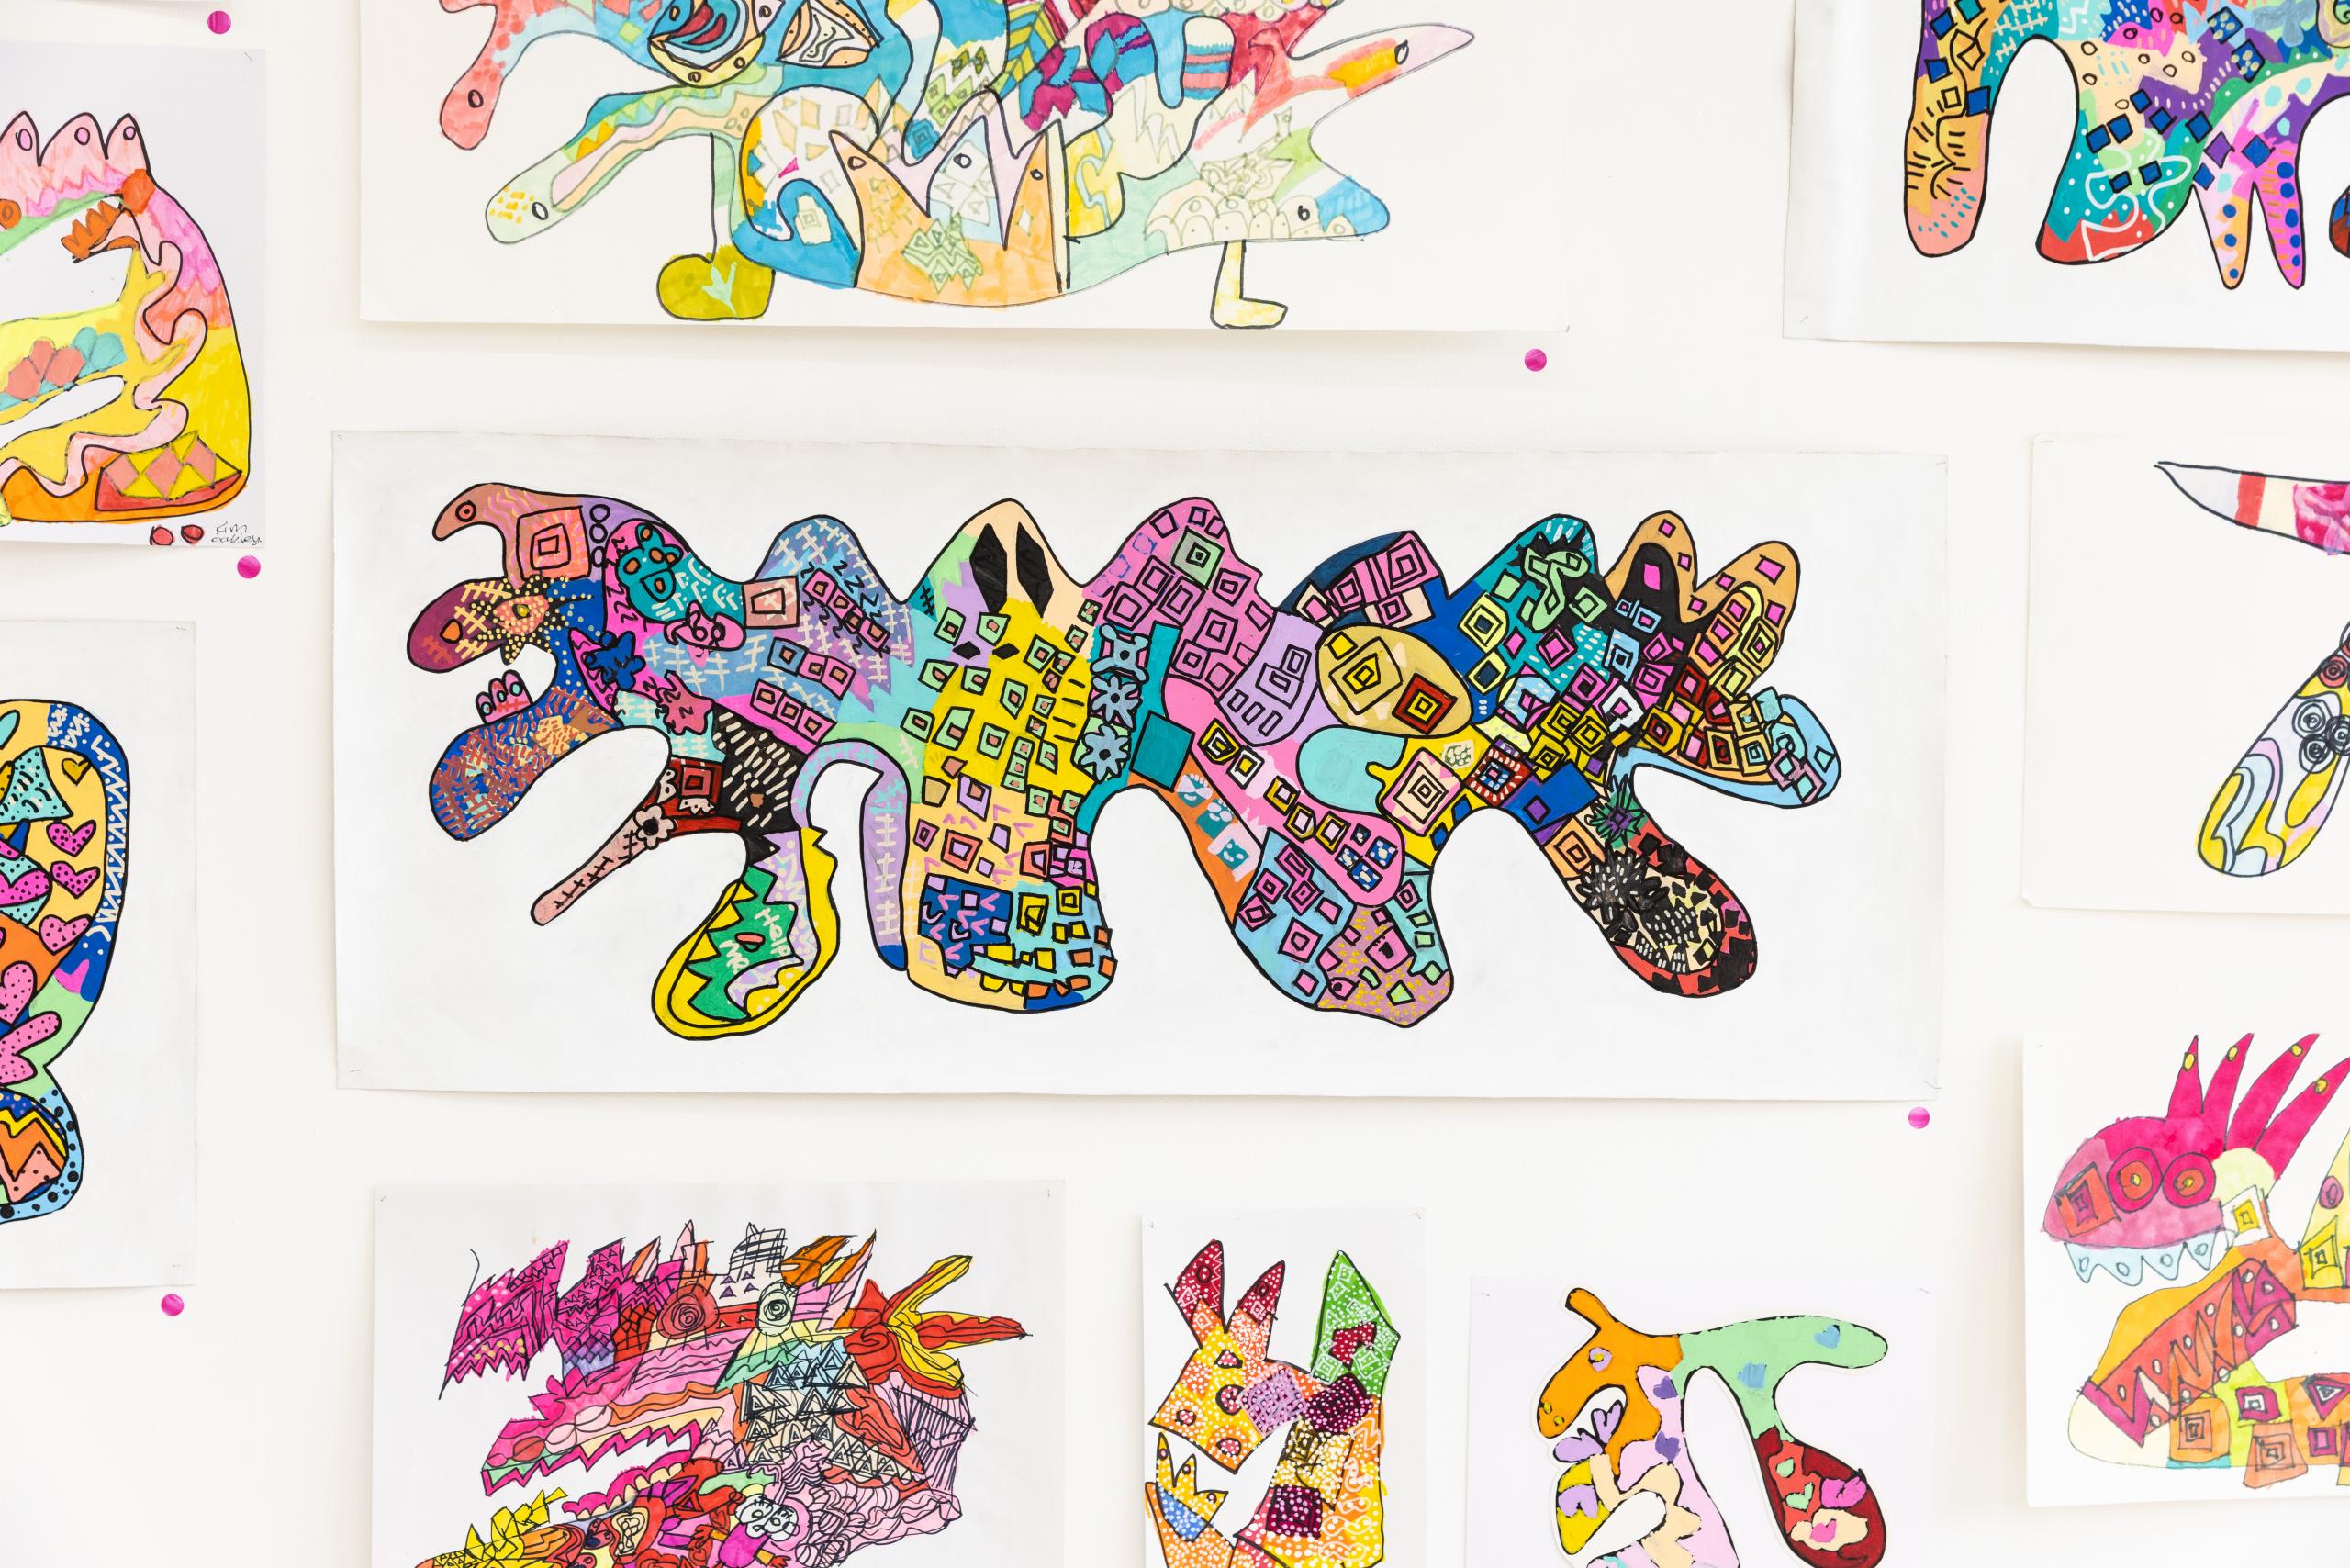 The images shows a collection of colorful drawings inspired by dragon shapes. The central piece is a large, irregularly shaped figure filled with various geometric patterns and vibrant colors, including pink, blue, yellow, green and black. Surrounding this central piece are several other similar abstract dragon- like shapes, each filled with different patterns and colors. The overall style is whimsical and playful, with a focus in bright, contrasting colors and intricate designs.